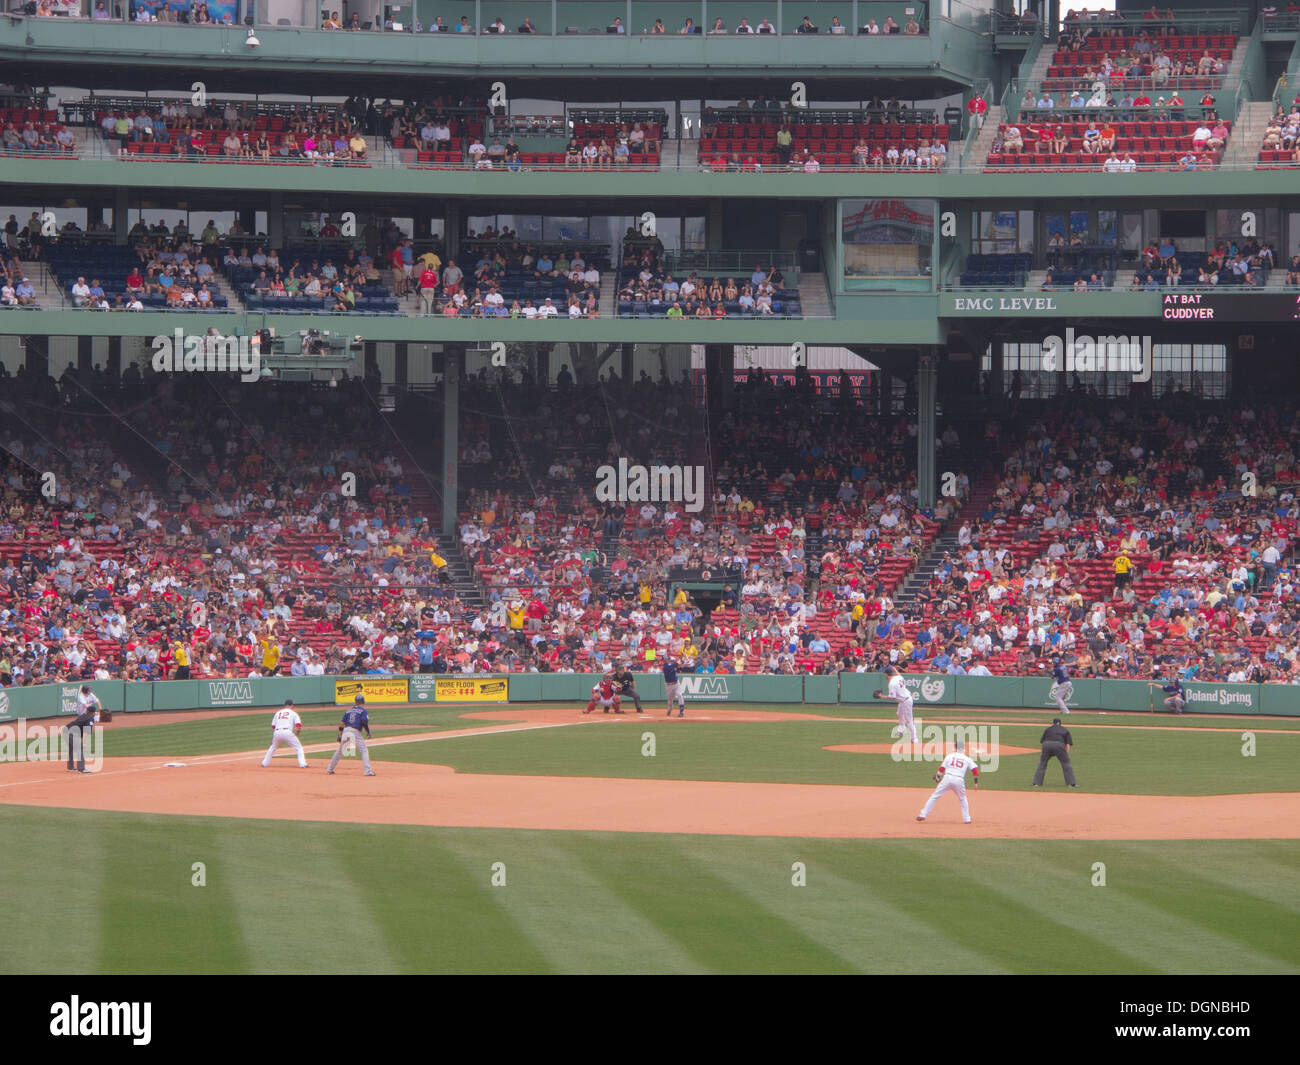 Game day at Fenway Park, home of the Boston Red Sox baseball team since 2012. The Boston Red Sox won the 2013 World Series.Game Stock Photo